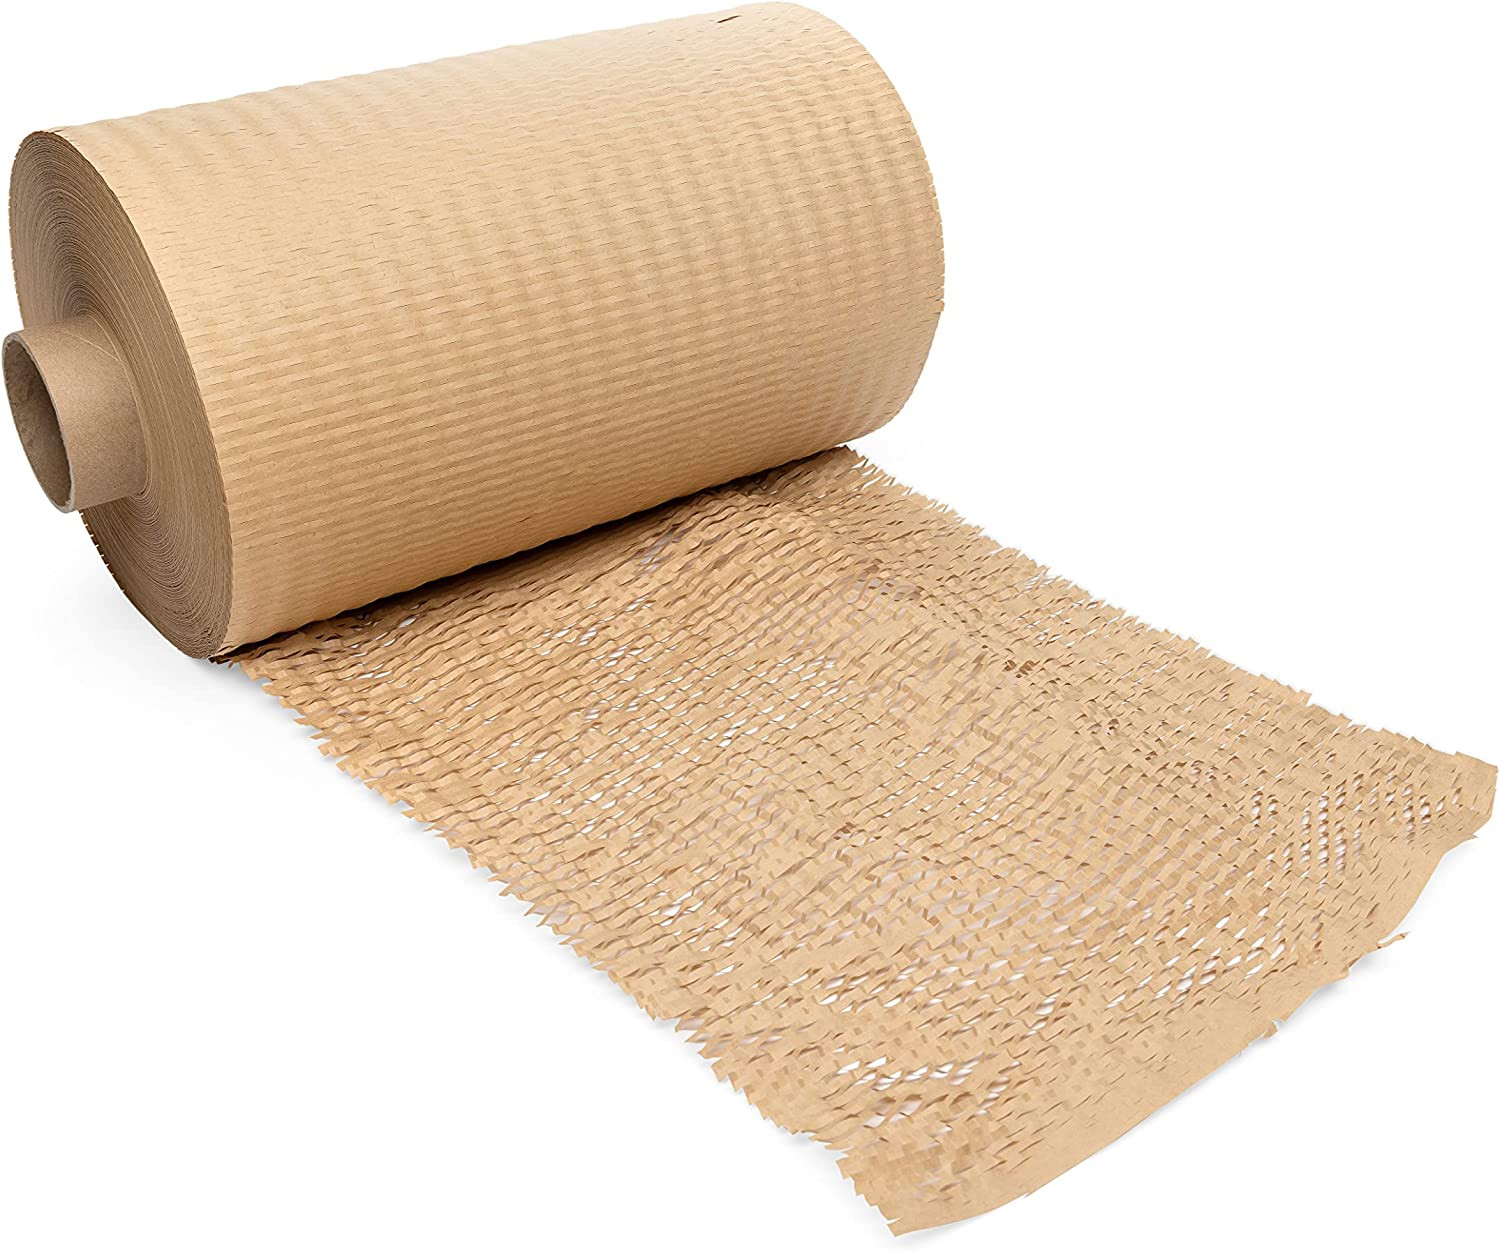  IDL Packaging Honeycomb Packing Paper Set, Brown